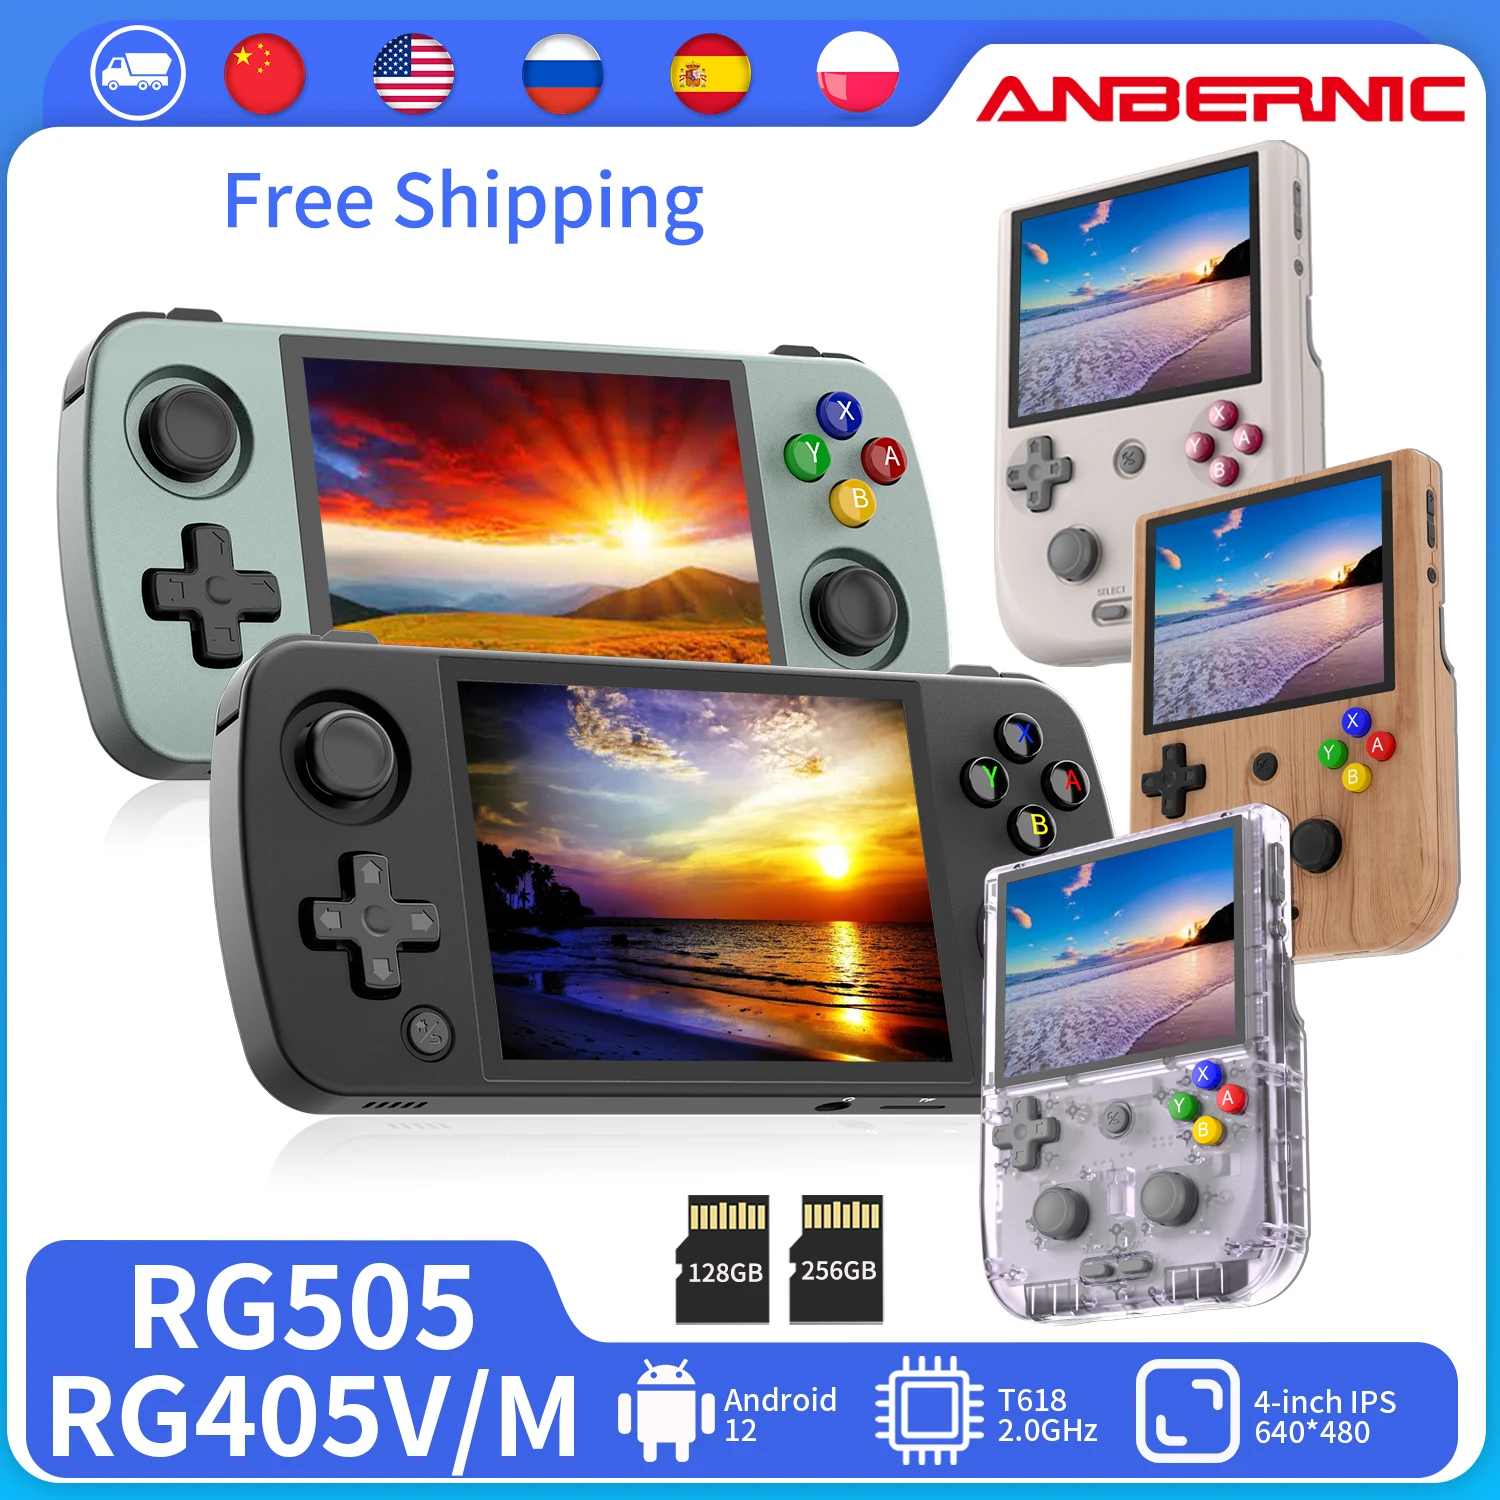 ANBERNIC RG405M Handheld Game Console Metal Case Android 12 5G WiFi 128G  eMMC